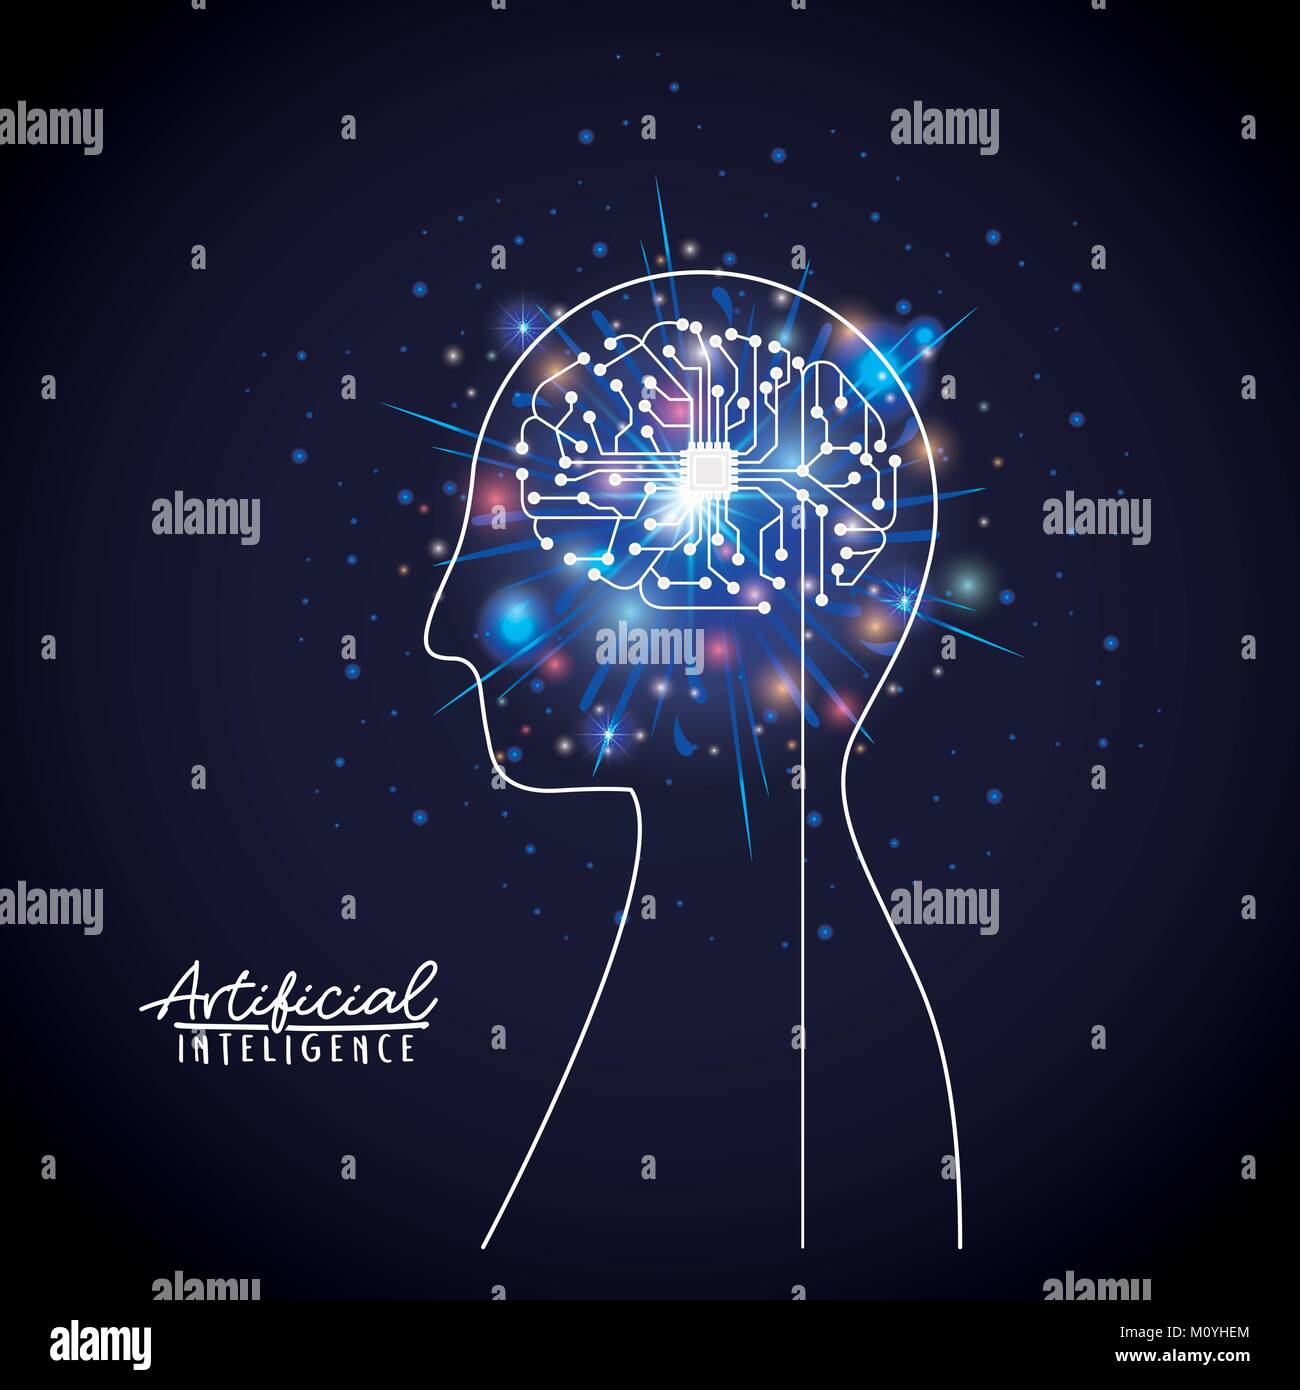 artificial intelligence poster with half body human silhouette with brain in transparency over dark blue background with sparkles Stock Vector